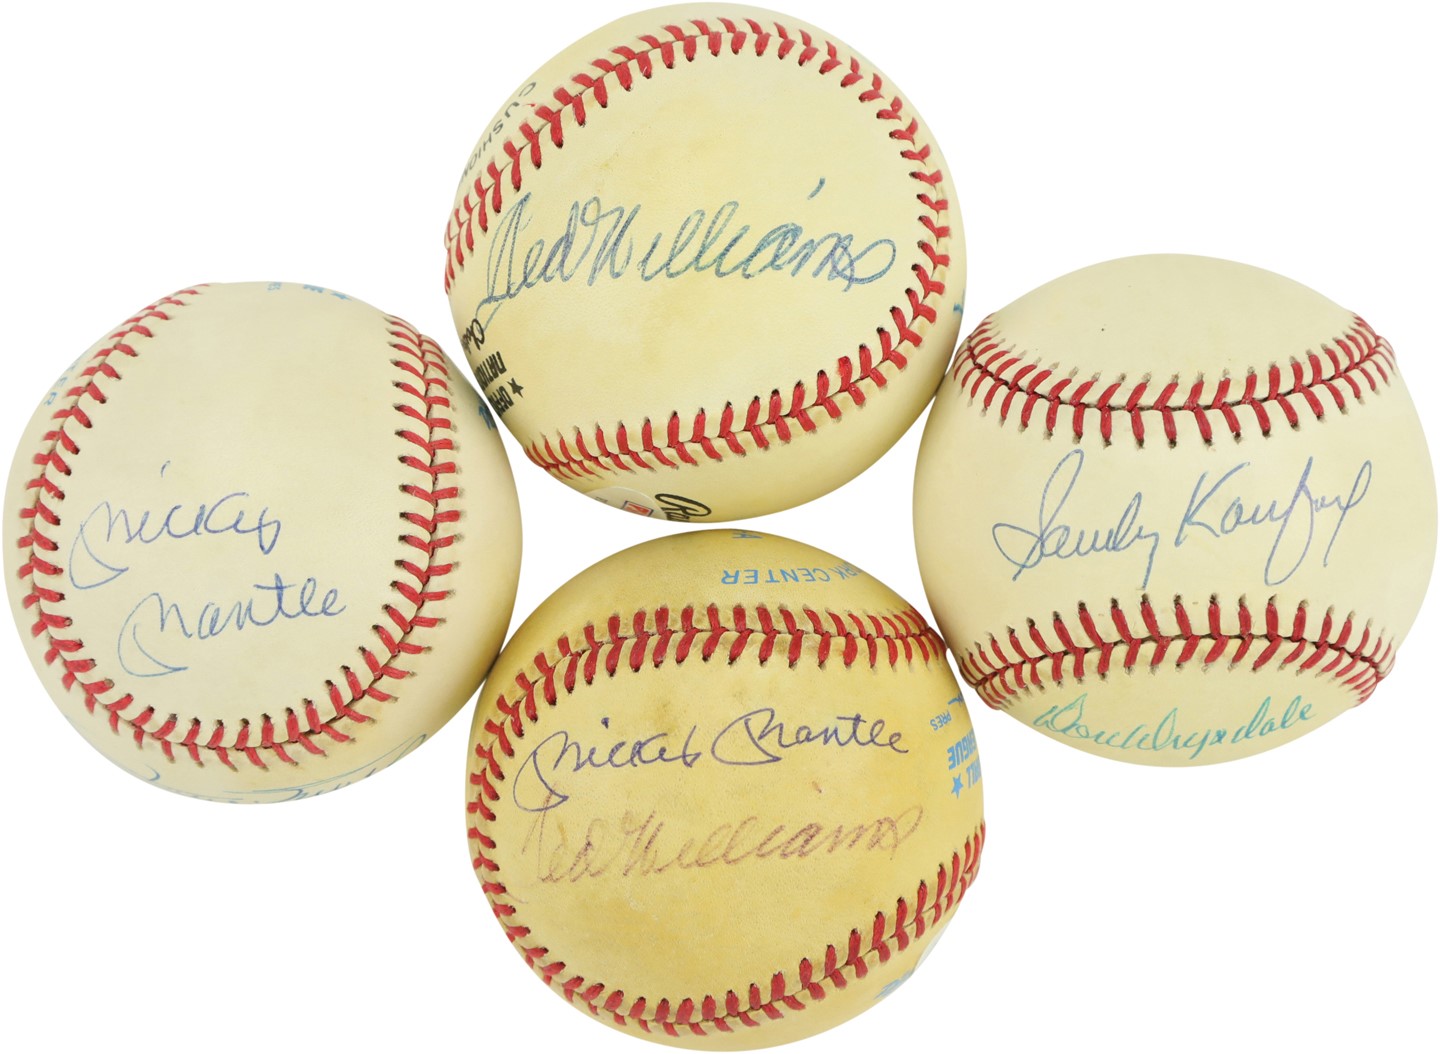 Baseball Autographs - Important Hall of Famers Signed Baseball Quartet with Triple Crown (PSA)